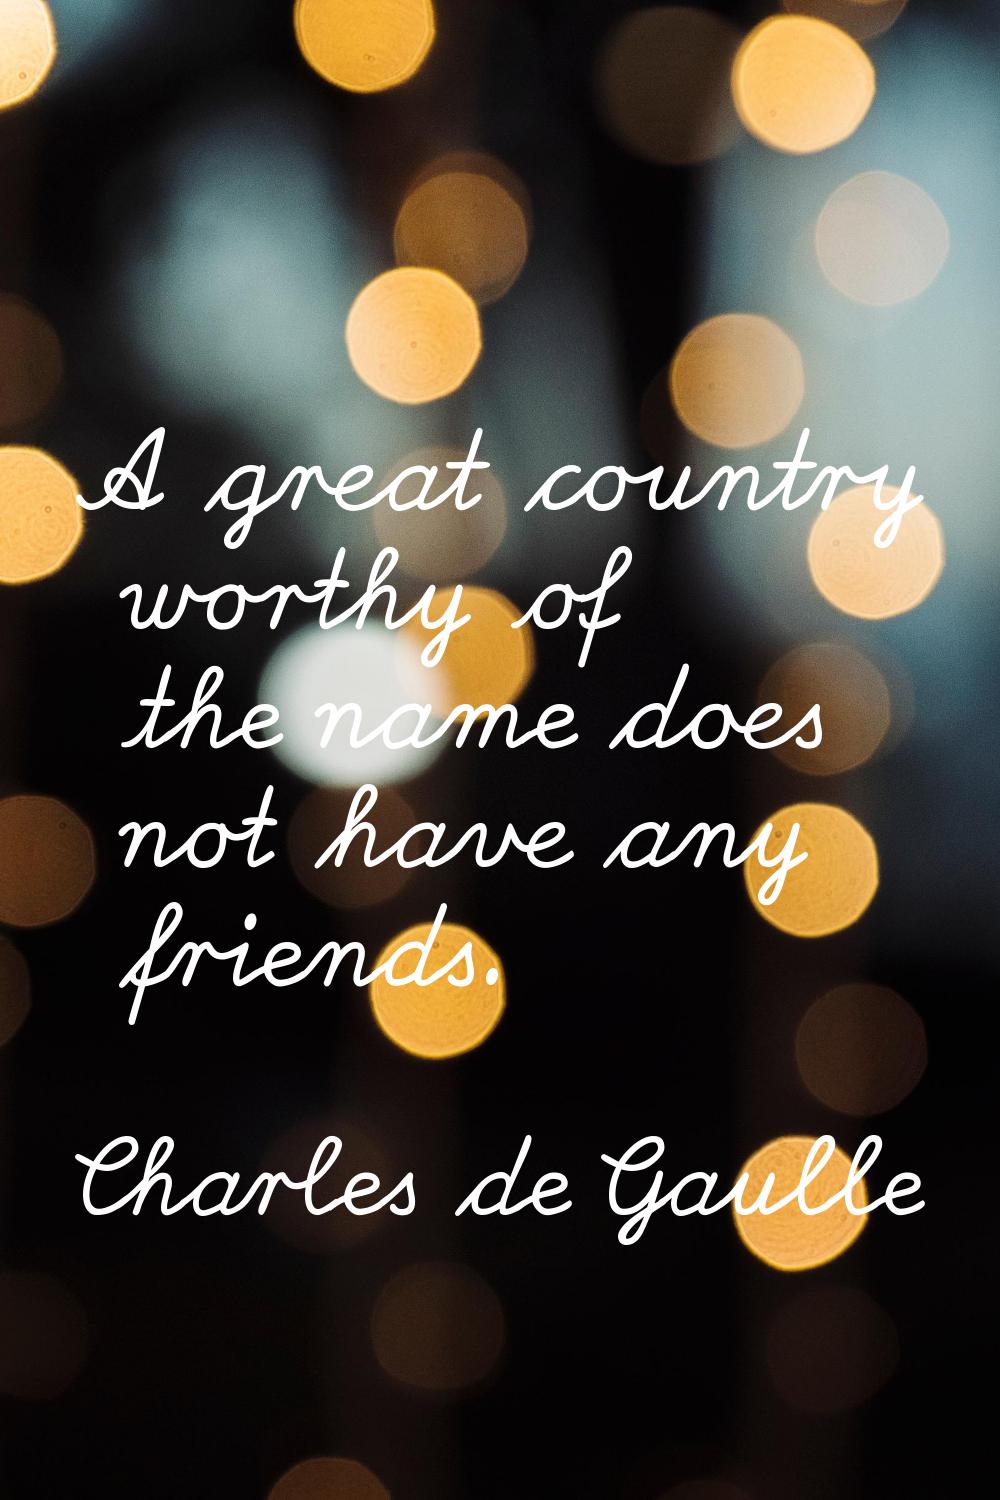 A great country worthy of the name does not have any friends.